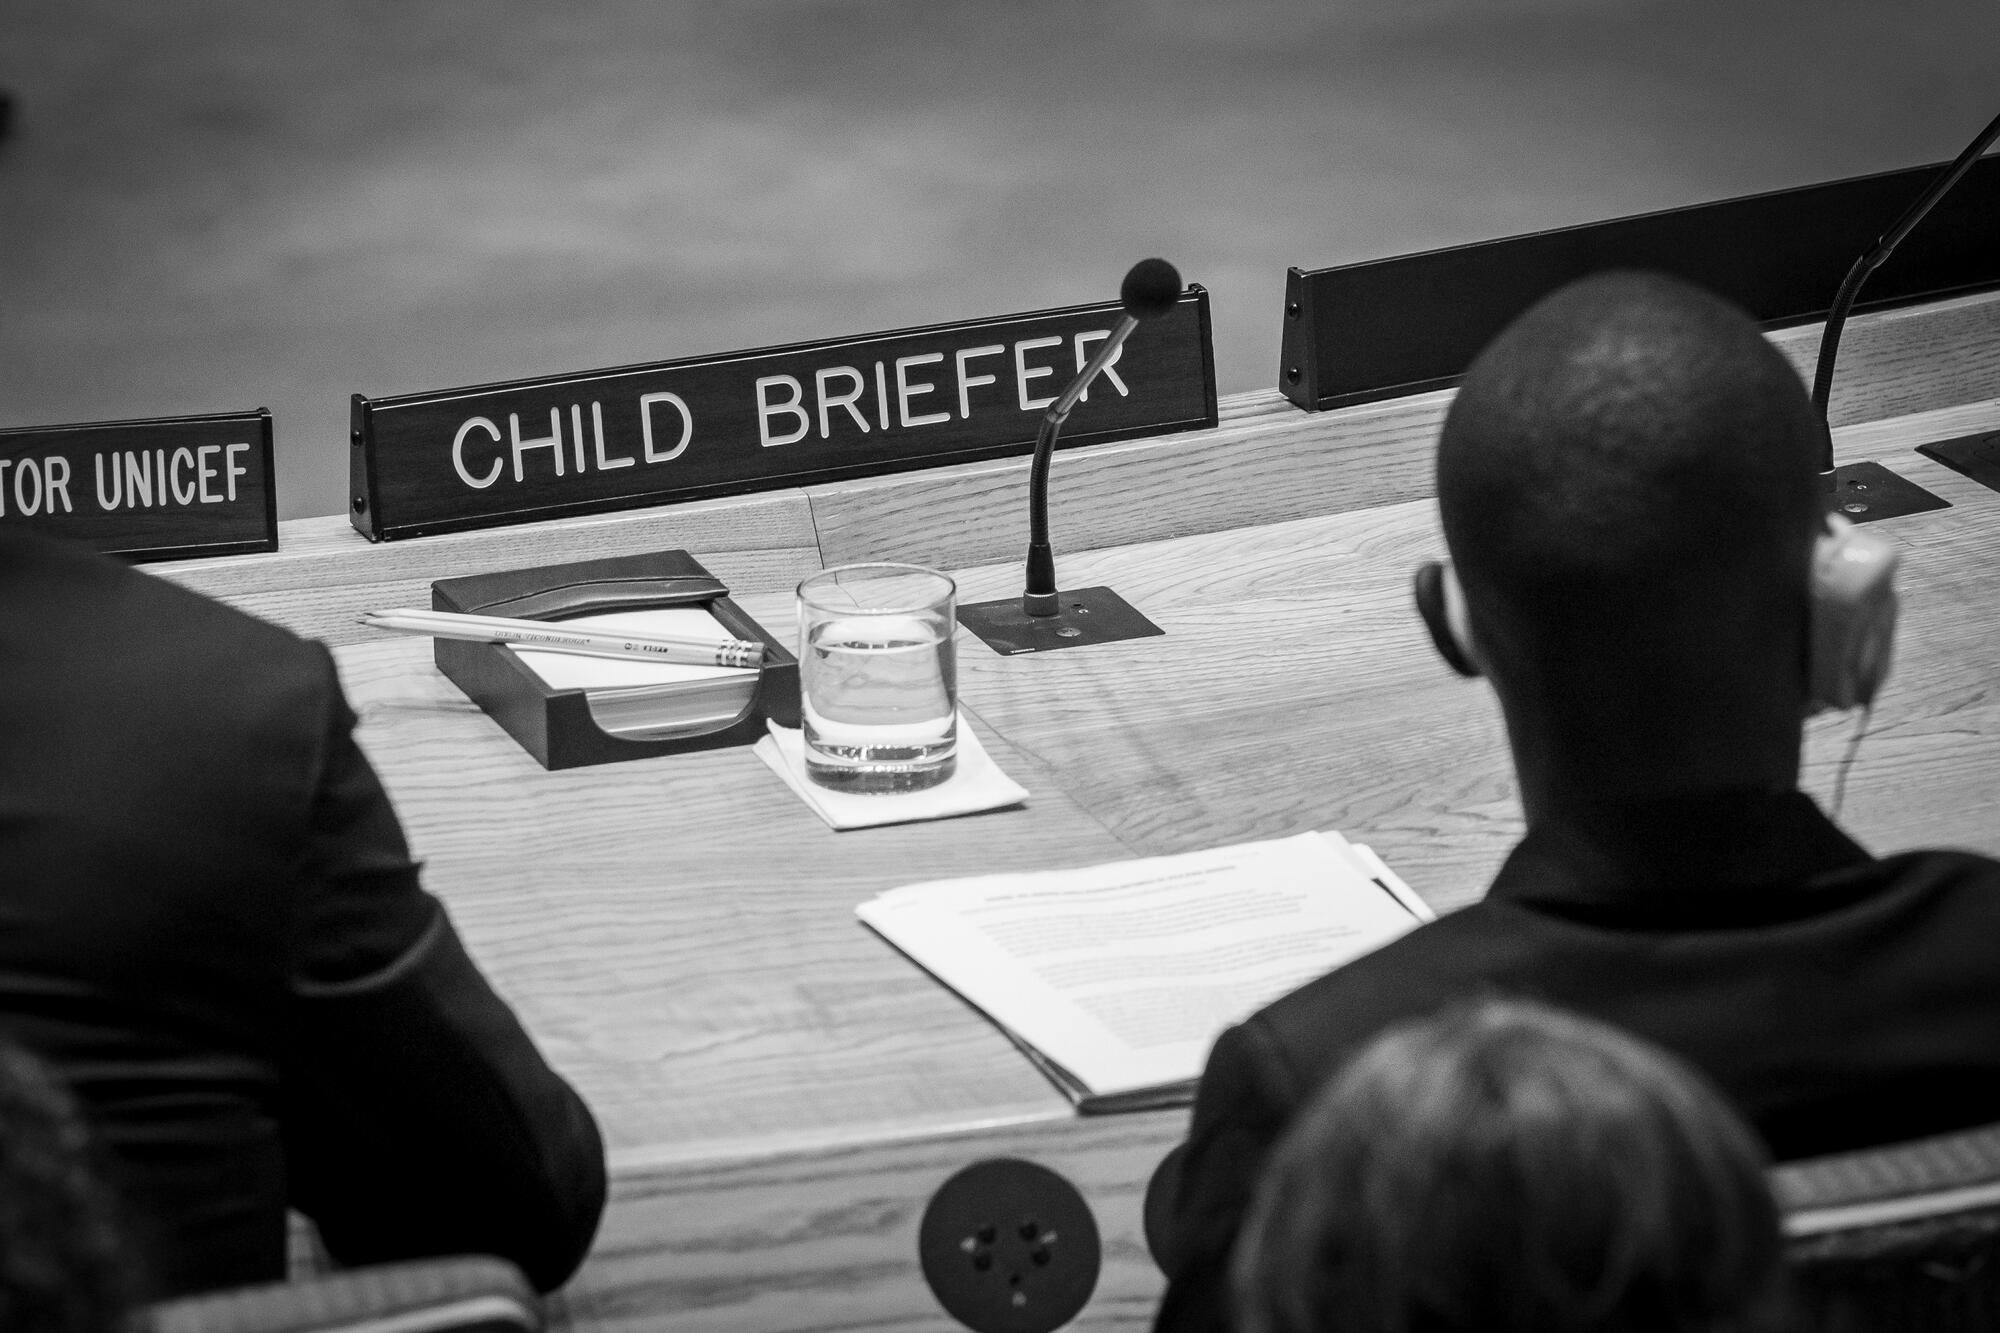 A child briefer attends the Security Council meeting on children and armed conflict on the theme “How to advance our collective norms towards protecting children and ending all grave violations”. The Council heard a Report of the Secretary-General on children and armed conflict.